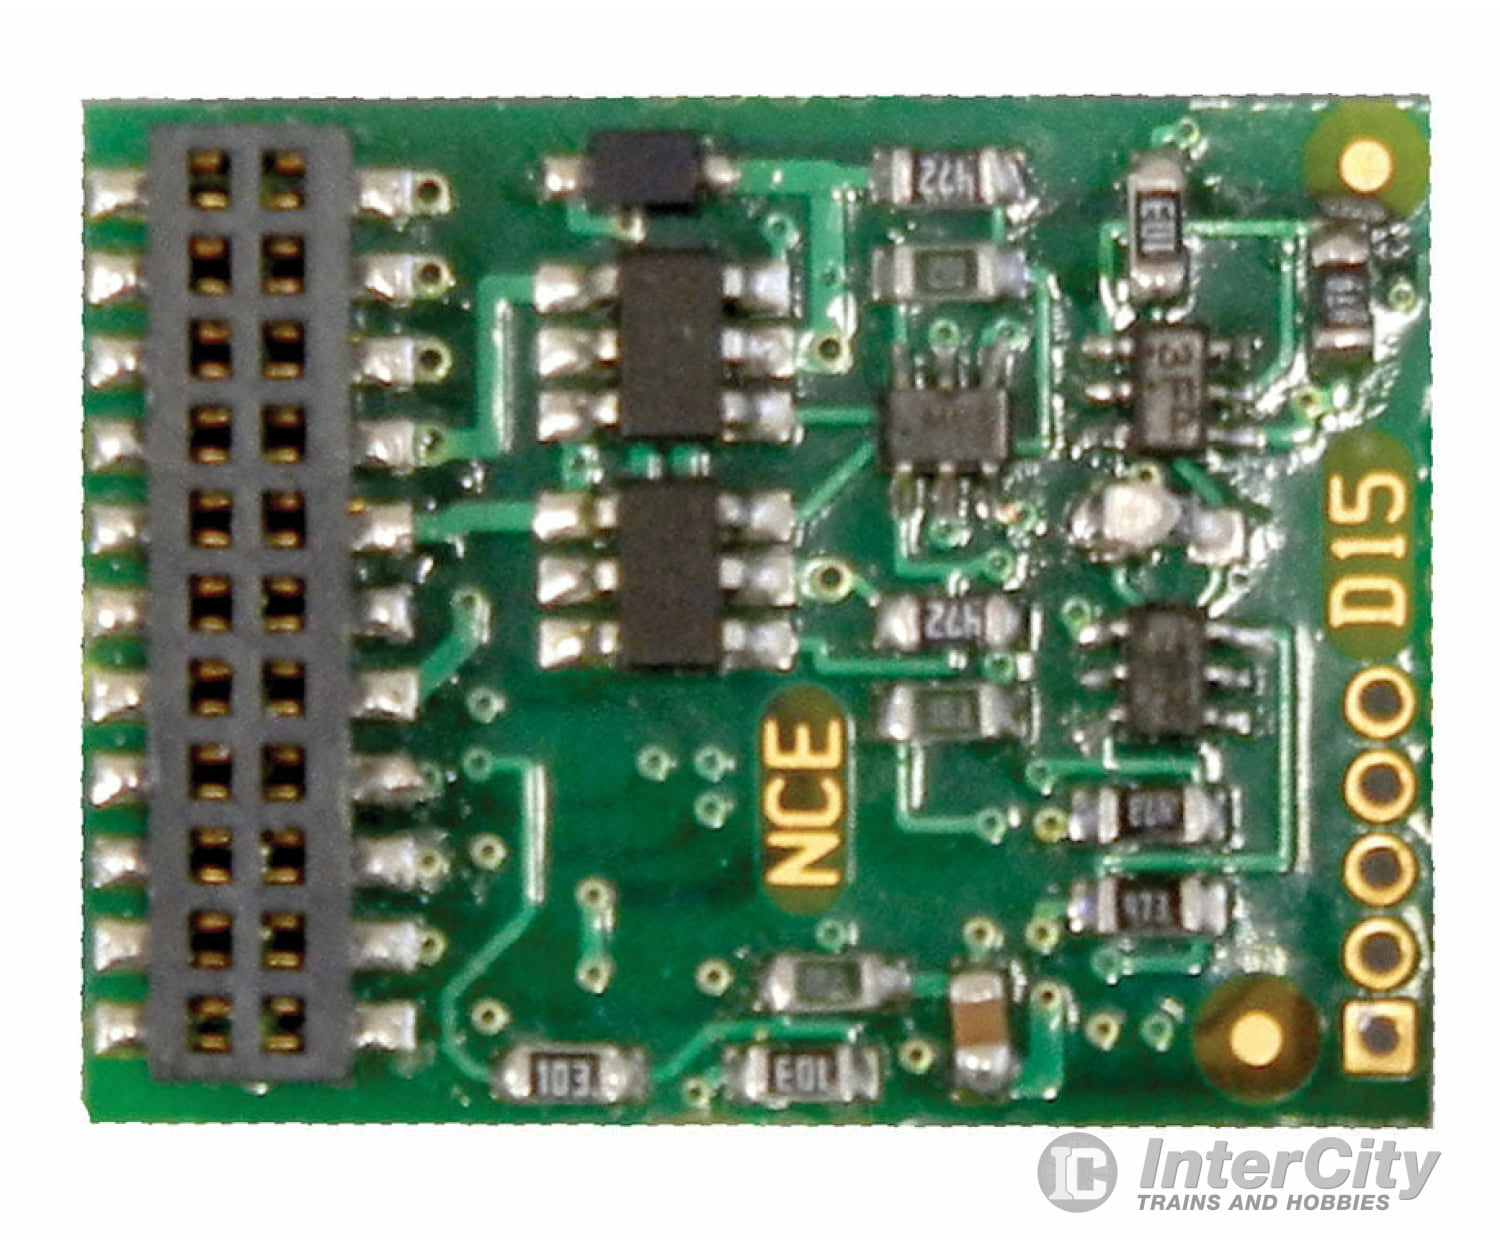 Nce 156 6-Function Dcc Control Decoder -- With 21-Pin Mtc Plug Decoders